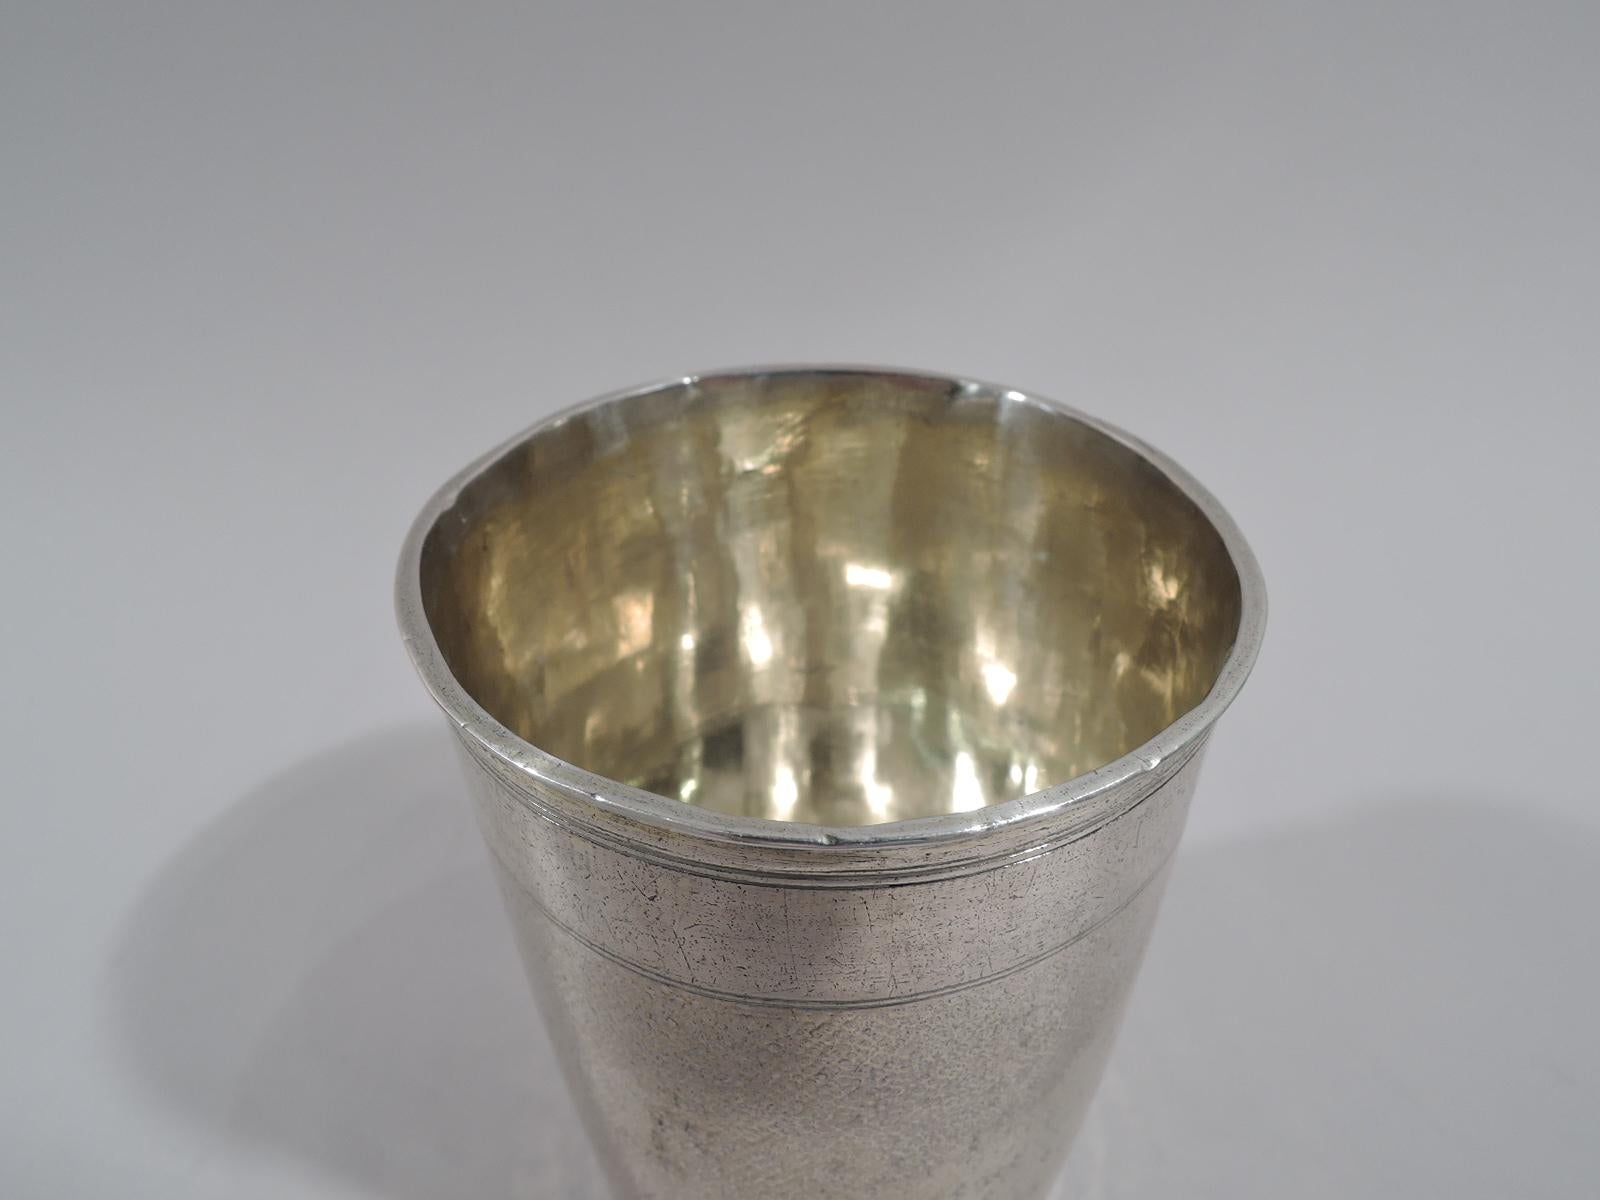 German silver beaker, 18th century. Gently tapering sides with all-over stippling. At top, plain band between engraved double lines. Nurnberg city mark and letters TR in circle. Weight: 4 troy ounces.